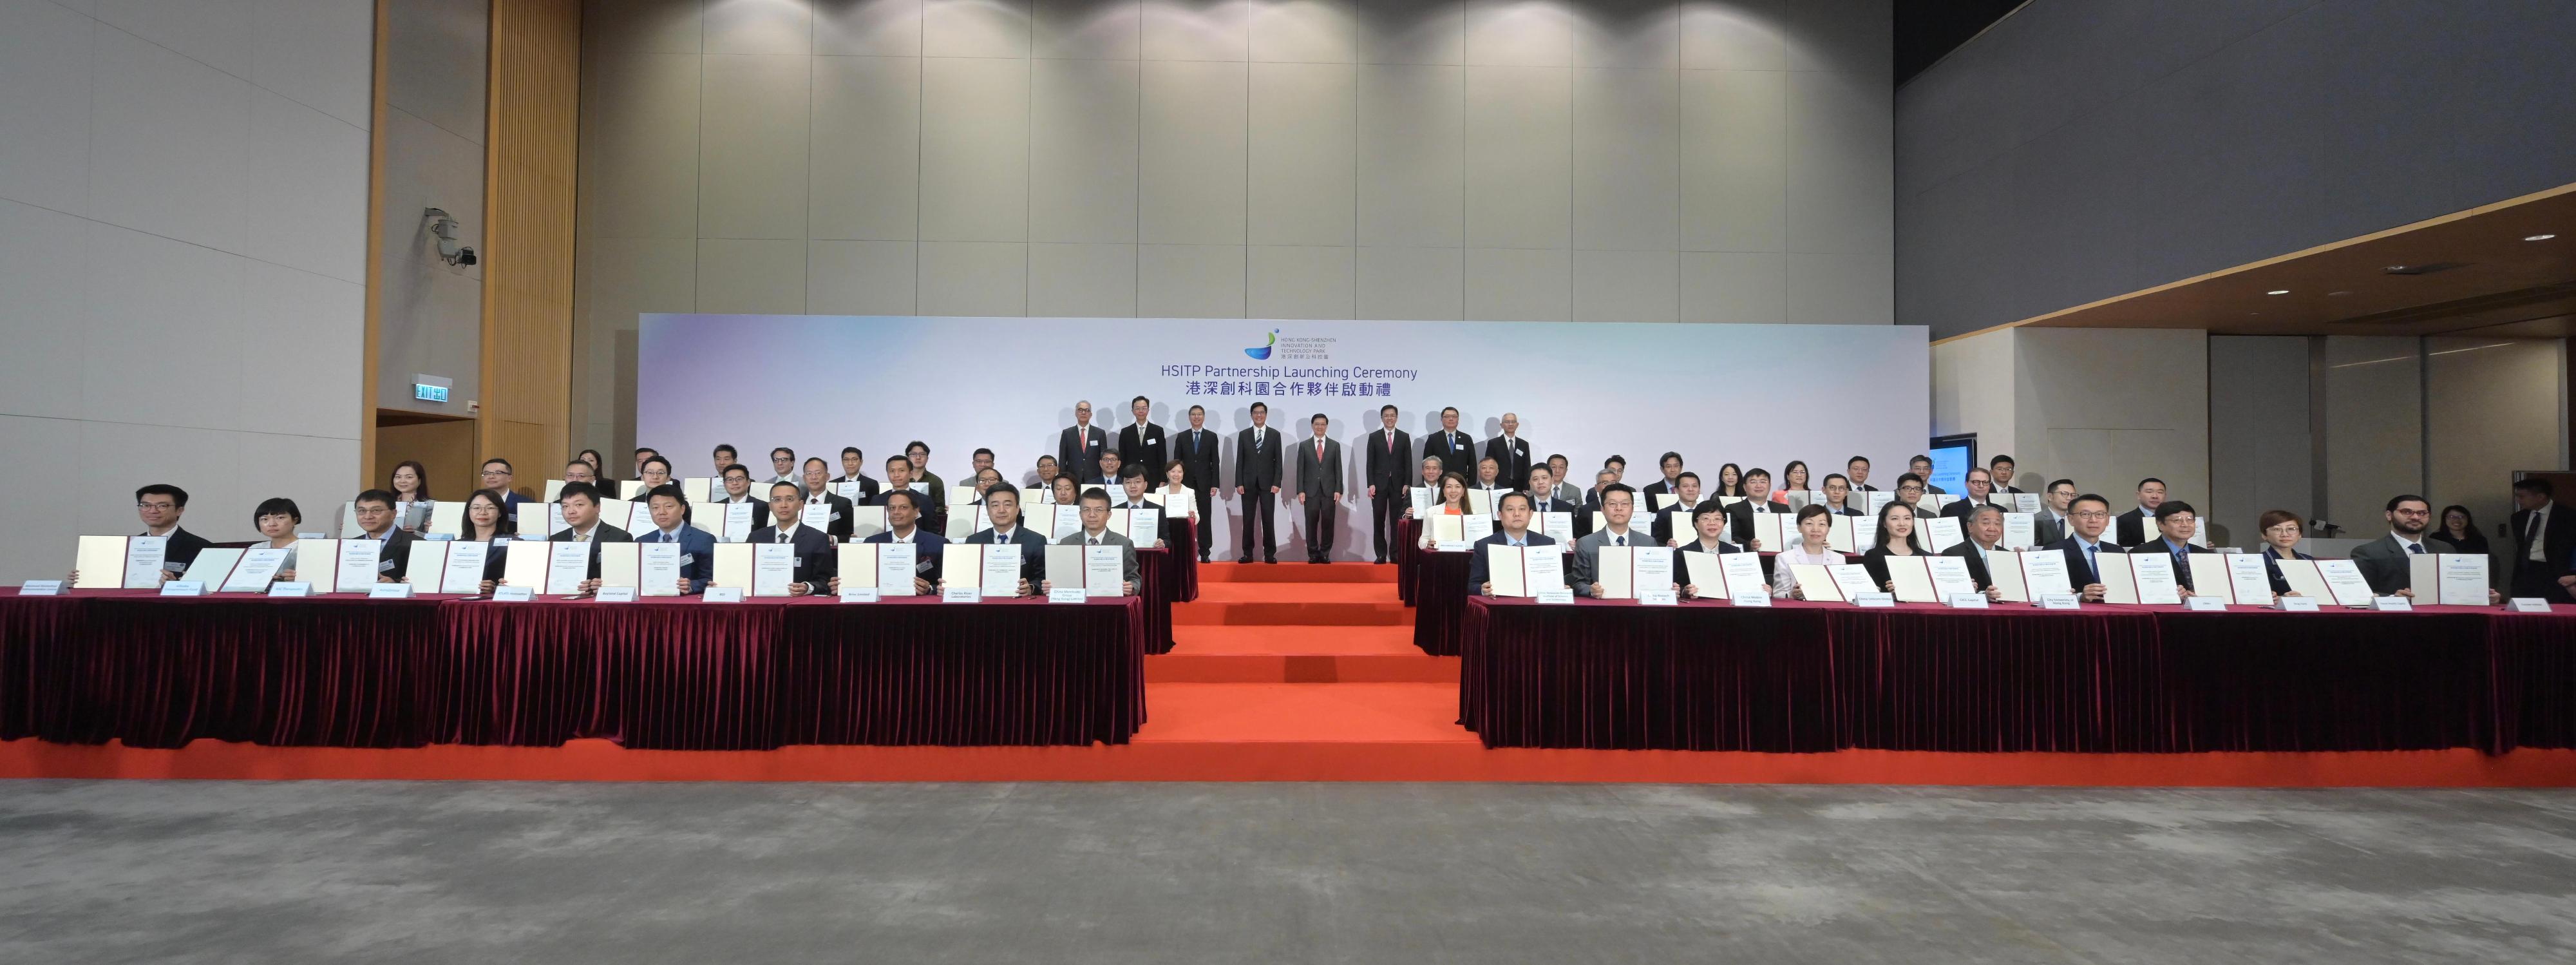 The Chief Executive, Mr John Lee, attended the Hong Kong-Shenzhen Innovation and Technology Park Partnership Launching Ceremony today (April 18). Photo shows (fourth row, from second left) the Alternate Chairperson of the Hong Kong-Shenzhen Innovation and Technology Park Limited, Professor John Chai; the Permanent Secretary for Innovation, Technology and Industry, Mr Eddie Mak; the Acting Financial Secretary, Mr Michael Wong; Mr Lee; the Secretary for Innovation, Technology and Industry, Professor Sun Dong; the Chairman of the Hong Kong Science and Technology Parks Corporation, Dr Sunny Chai, and other guests witnessing the signing of Memoranda of Understanding between the Hong Kong-Shenzhen Innovation and Technology Park Limited and representatives of enterprises at the ceremony.

